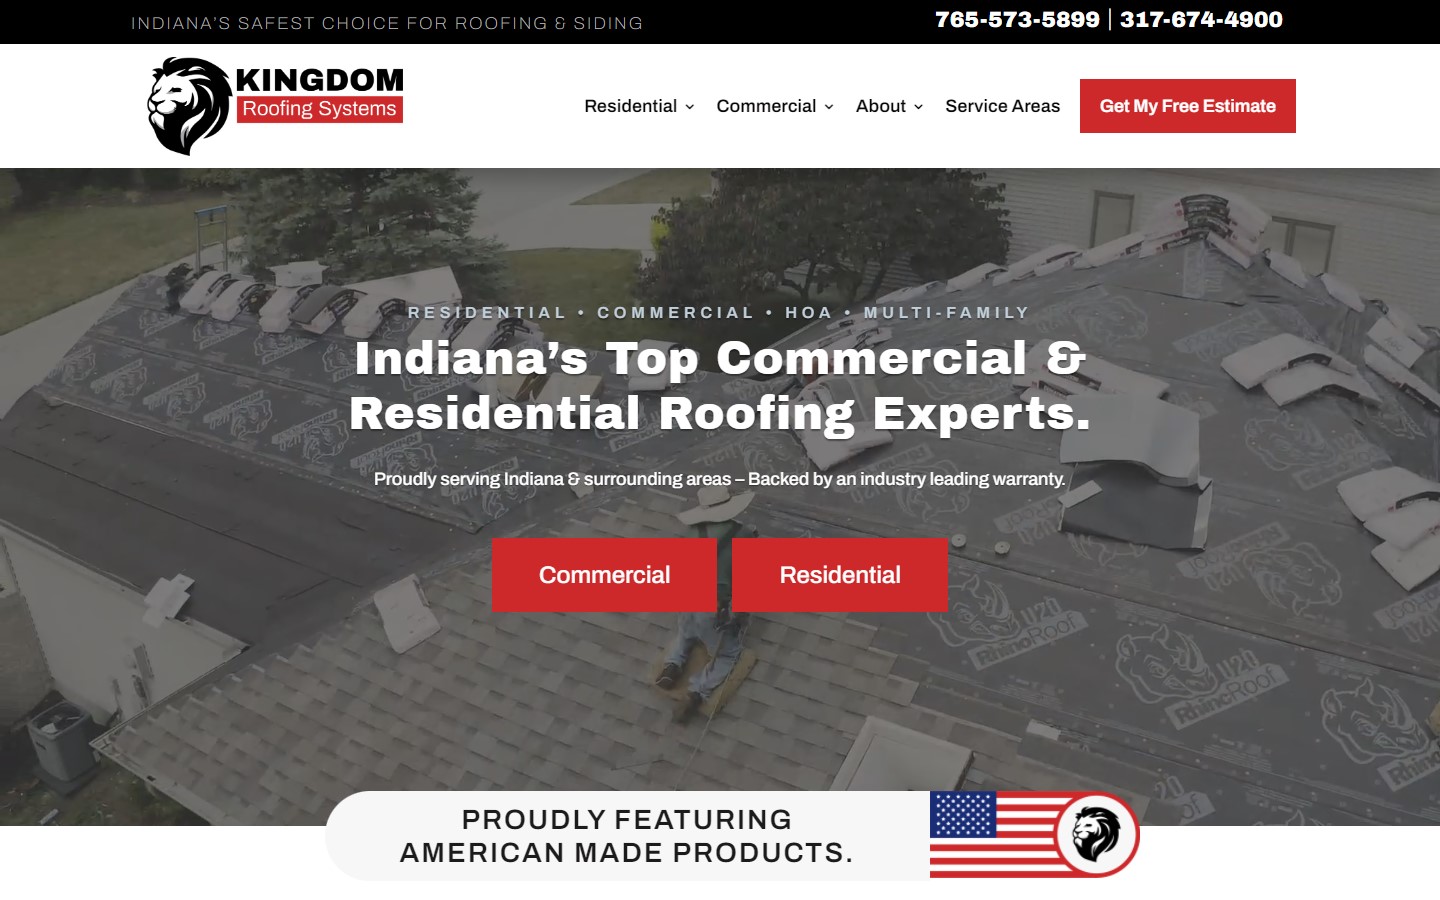 Kingdom Roofing Systems